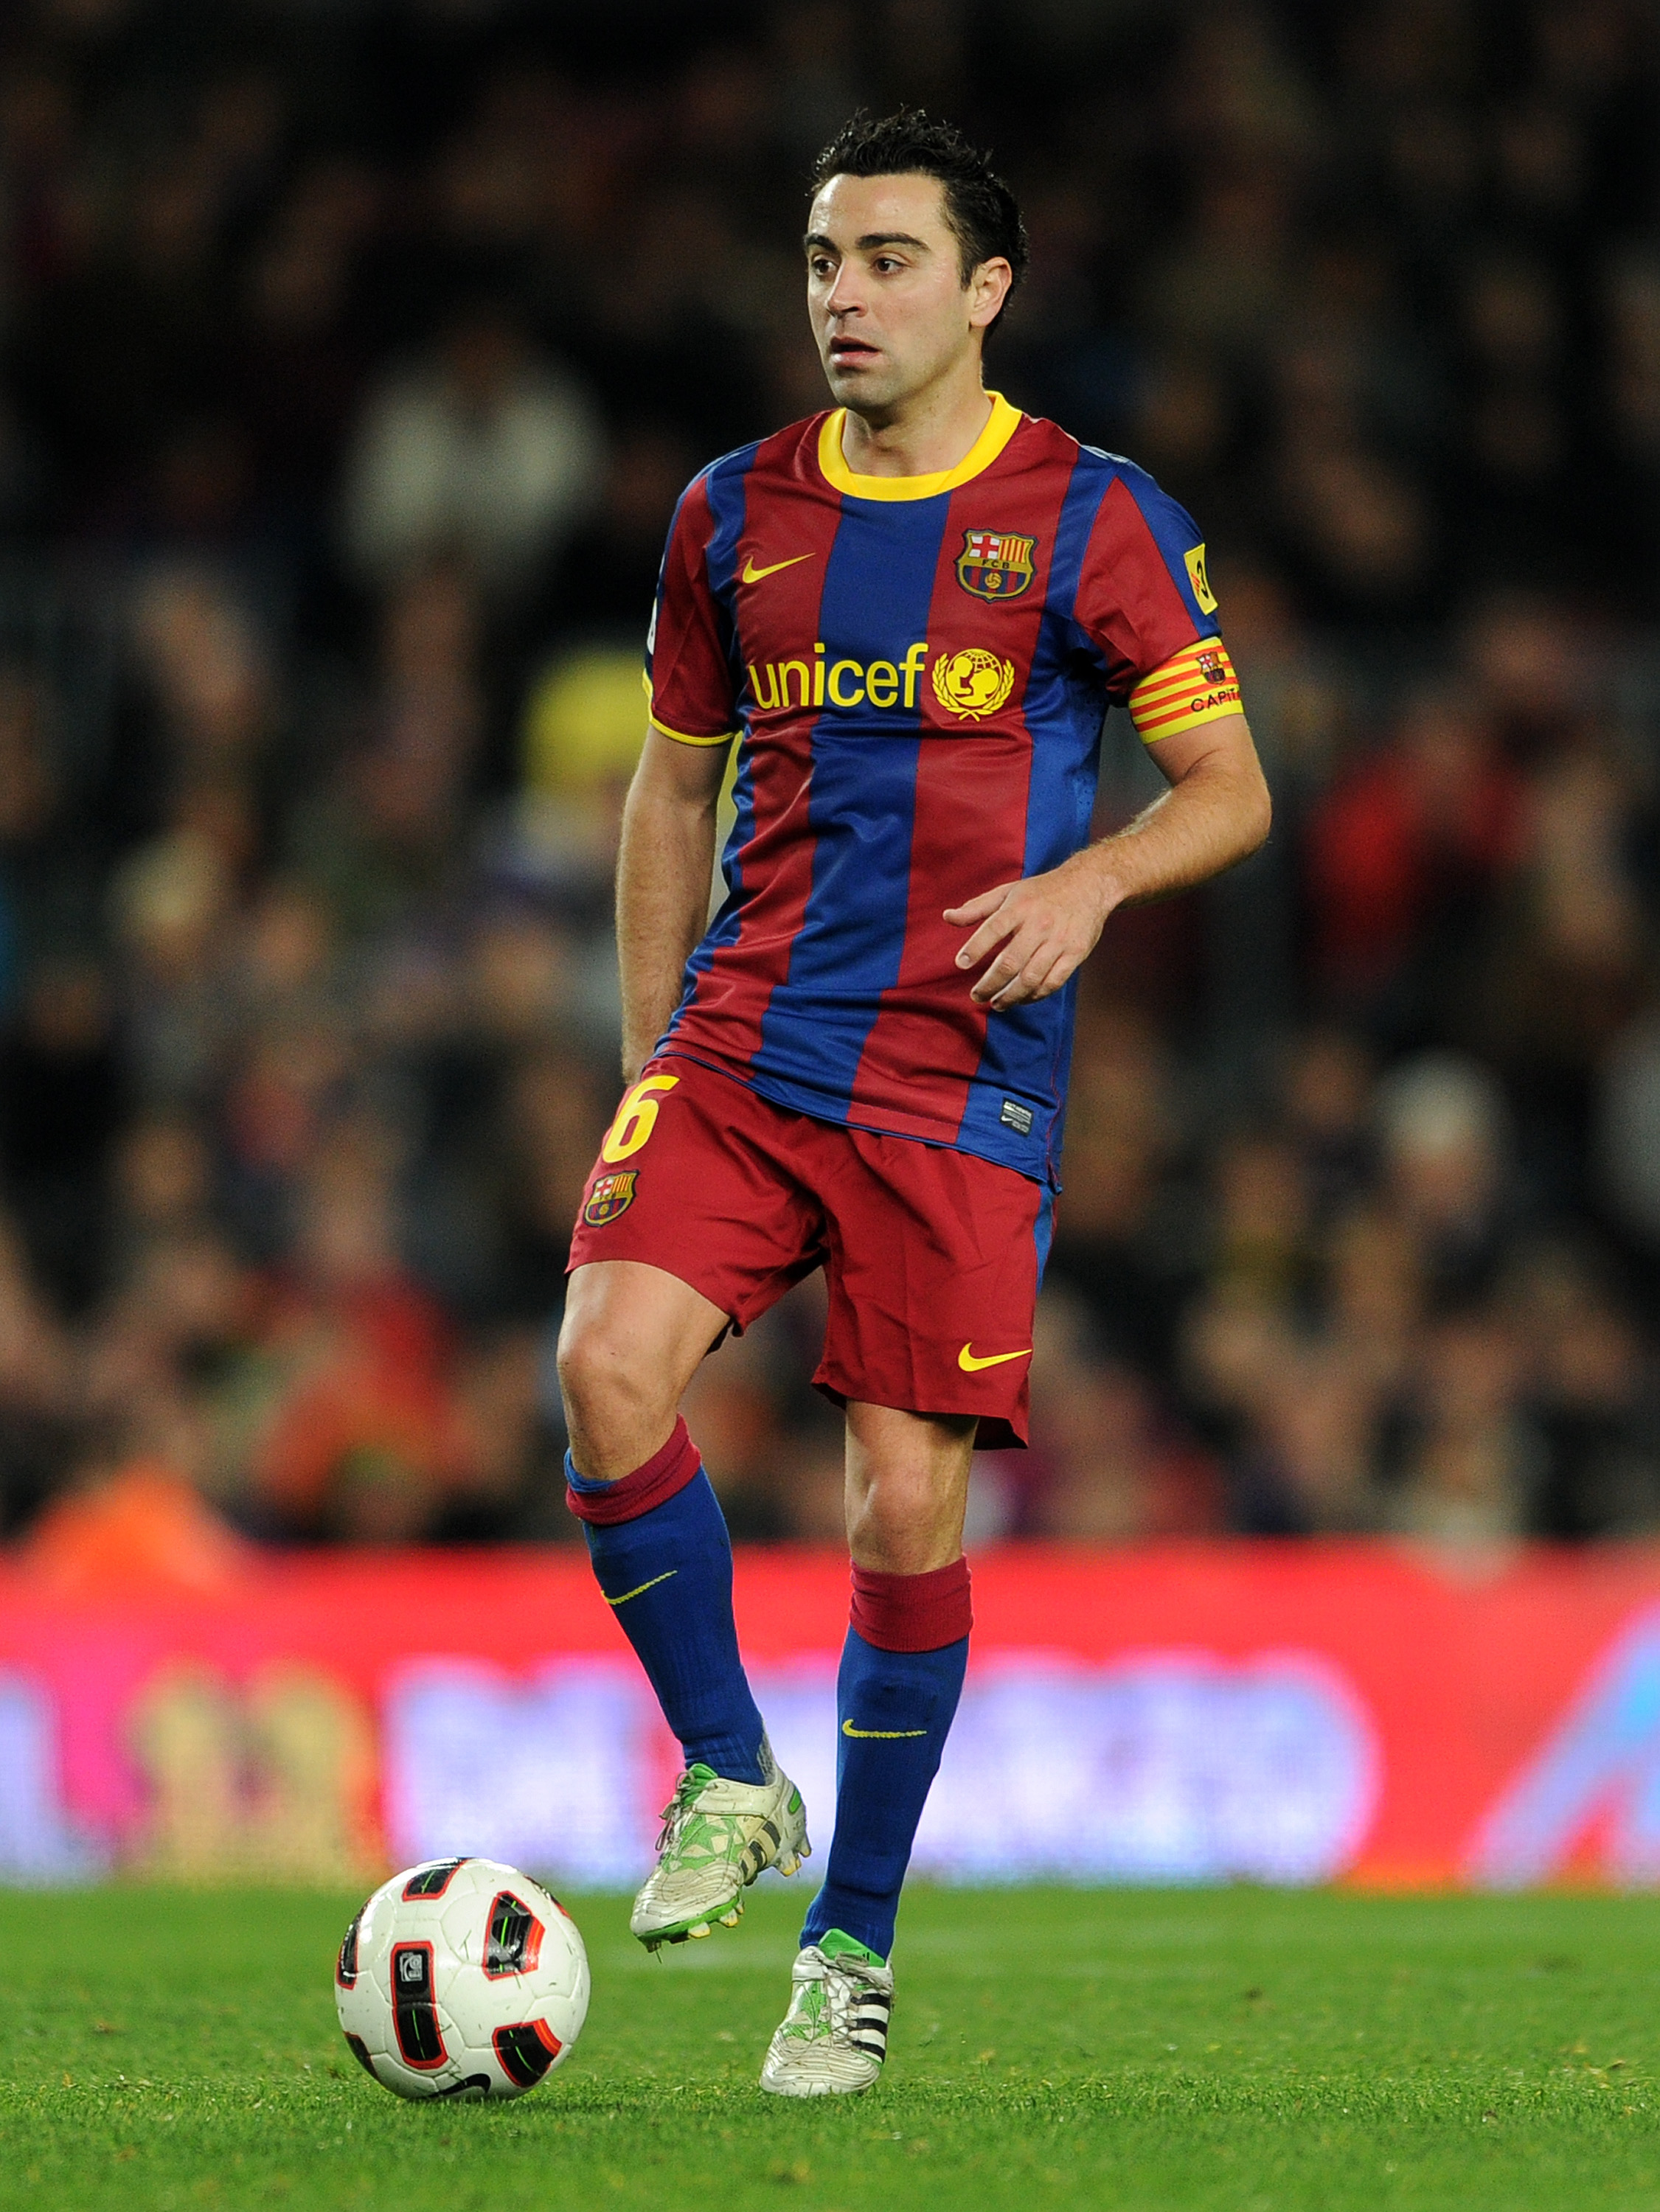 BARCELONA, SPAIN - MARCH 05:  Xavi Hernandez  of Bacelona controls the ball during the la Liga match between Barcelona and Real Zaragoza at the Camp Nou stadium on March 5, 2011 in Barcelona, Spain.  (Photo by Jasper Juinen/Getty Images)